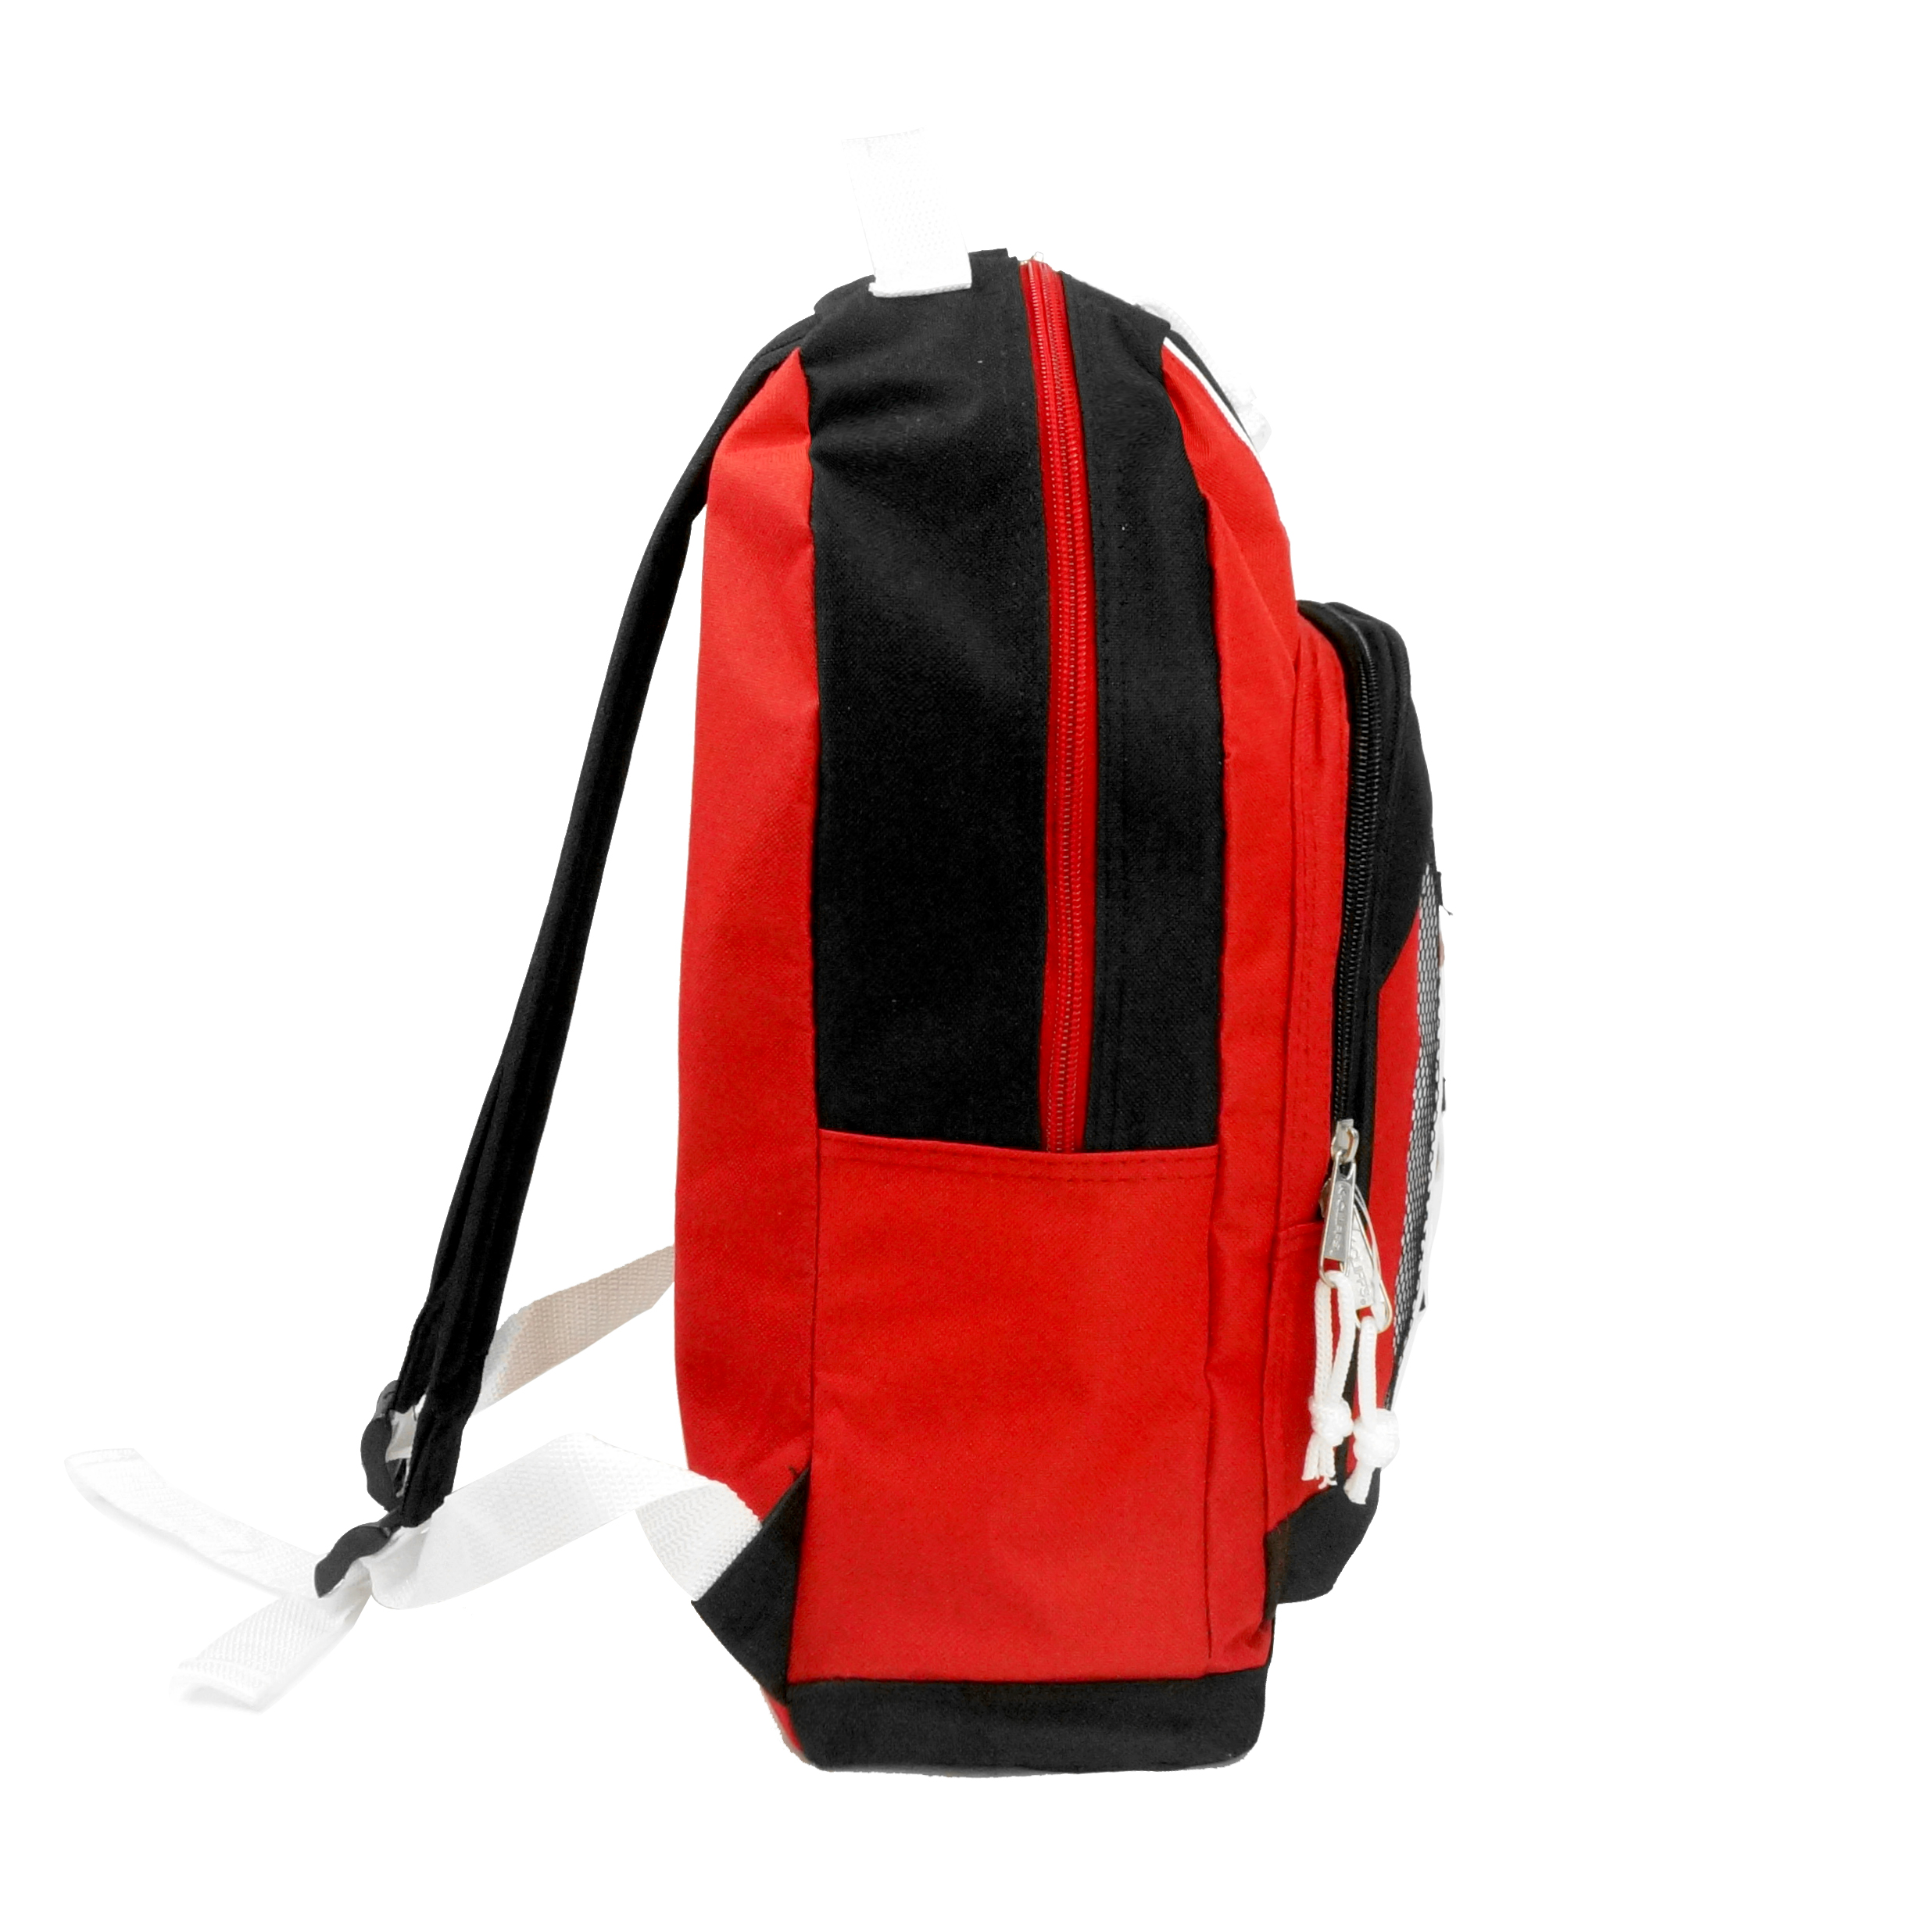 K-Cliffs 15” Lightweight School Backpack Daypack Bungee Bookbag Travel Unisex Kids- Adults Red, Polyester - image 2 of 6